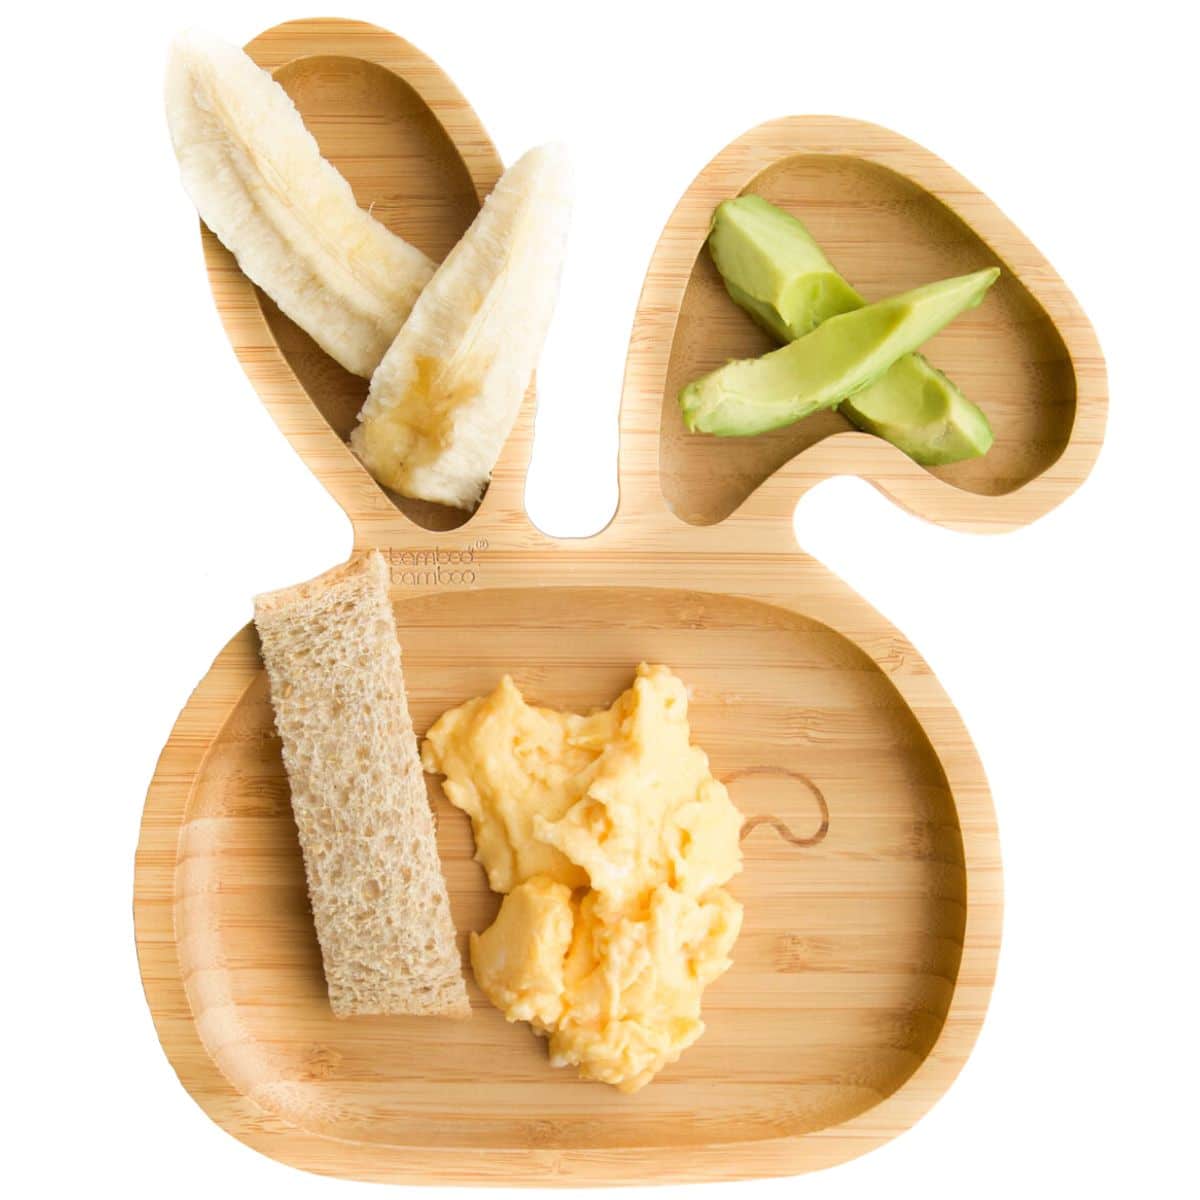 Scrambled Egg on Baby Bunny Plate Served With Toast Fingers, Banana and Avocado.